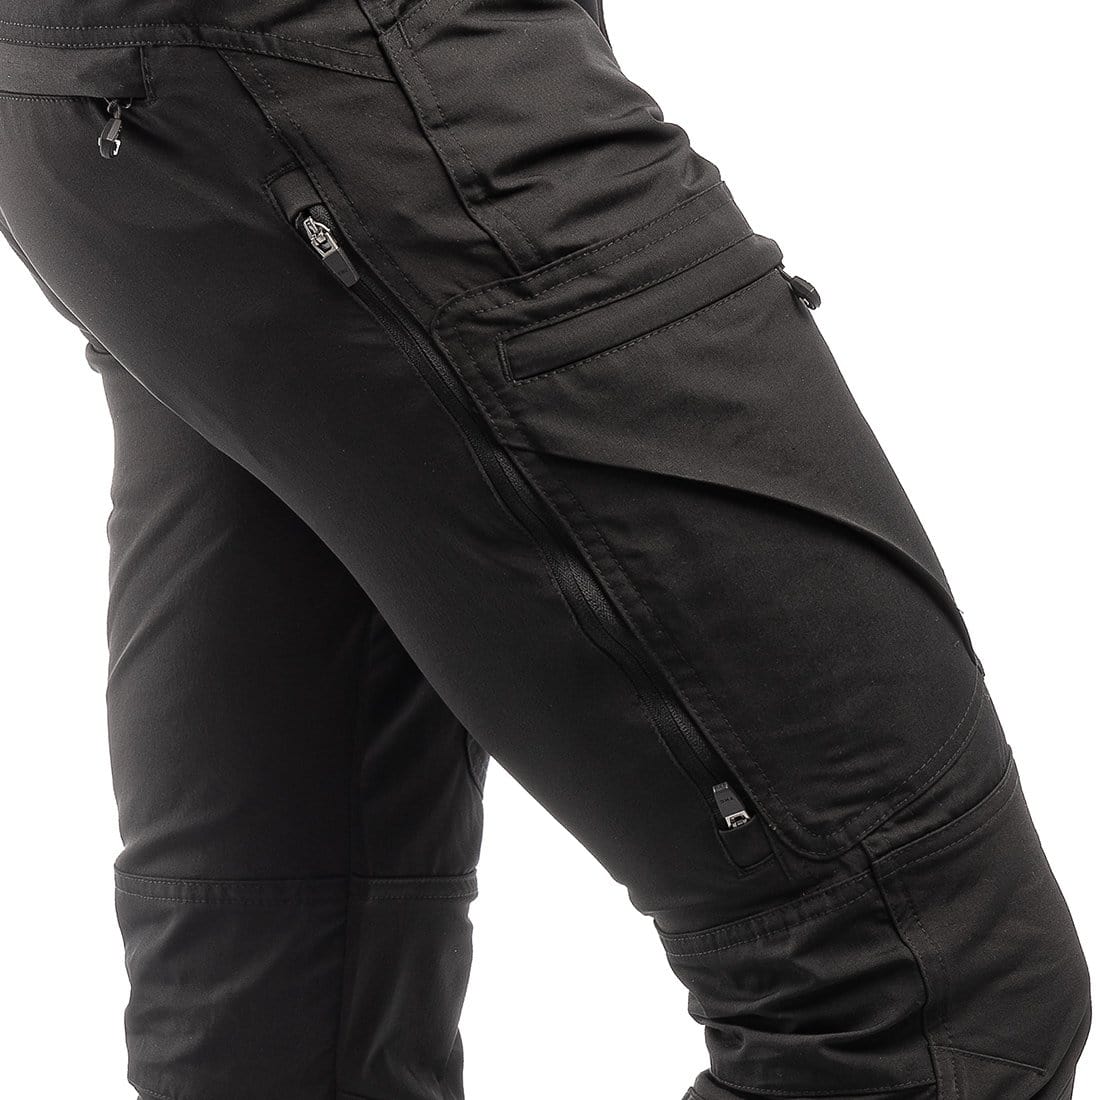 Best Men's Comfortable Stretchy Hiking Pants - Black (Tall